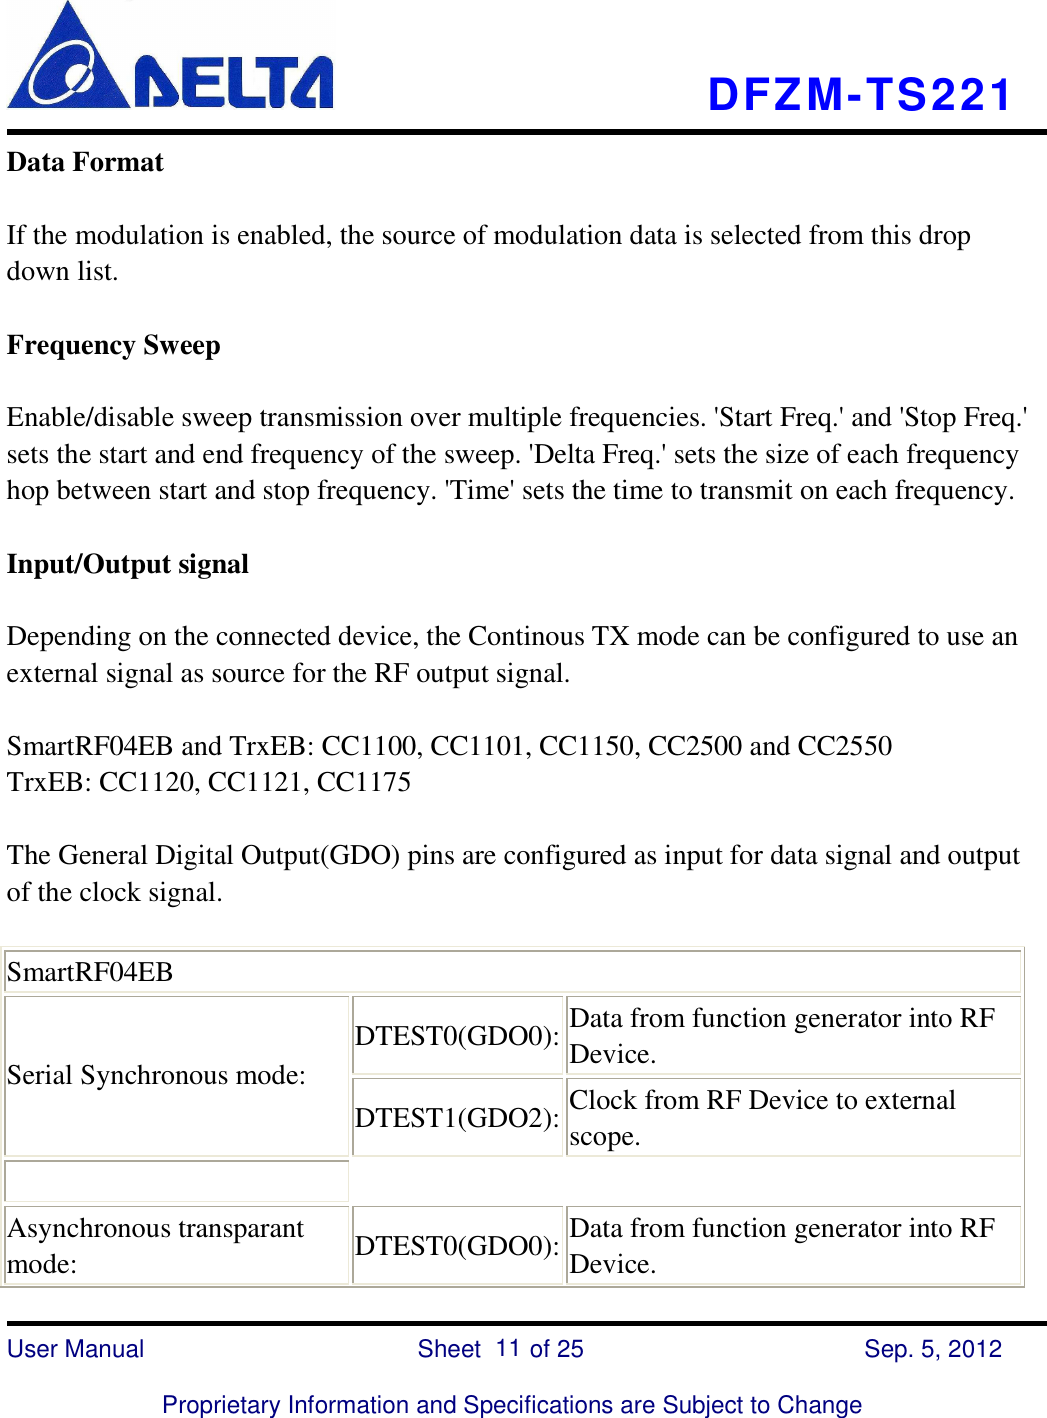    DFZM-TS221    User Manual                            Sheet        of 25      Sep. 5, 2012  Proprietary Information and Specifications are Subject to Change 11 Data Format  If the modulation is enabled, the source of modulation data is selected from this drop down list.  Frequency Sweep  Enable/disable sweep transmission over multiple frequencies. &apos;Start Freq.&apos; and &apos;Stop Freq.&apos; sets the start and end frequency of the sweep. &apos;Delta Freq.&apos; sets the size of each frequency hop between start and stop frequency. &apos;Time&apos; sets the time to transmit on each frequency.  Input/Output signal  Depending on the connected device, the Continous TX mode can be configured to use an external signal as source for the RF output signal.  SmartRF04EB and TrxEB: CC1100, CC1101, CC1150, CC2500 and CC2550 TrxEB: CC1120, CC1121, CC1175  The General Digital Output(GDO) pins are configured as input for data signal and output of the clock signal.  SmartRF04EB DTEST0(GDO0): Data from function generator into RF Device. Serial Synchronous mode: DTEST1(GDO2): Clock from RF Device to external scope.      Asynchronous transparant mode:  DTEST0(GDO0): Data from function generator into RF Device. 